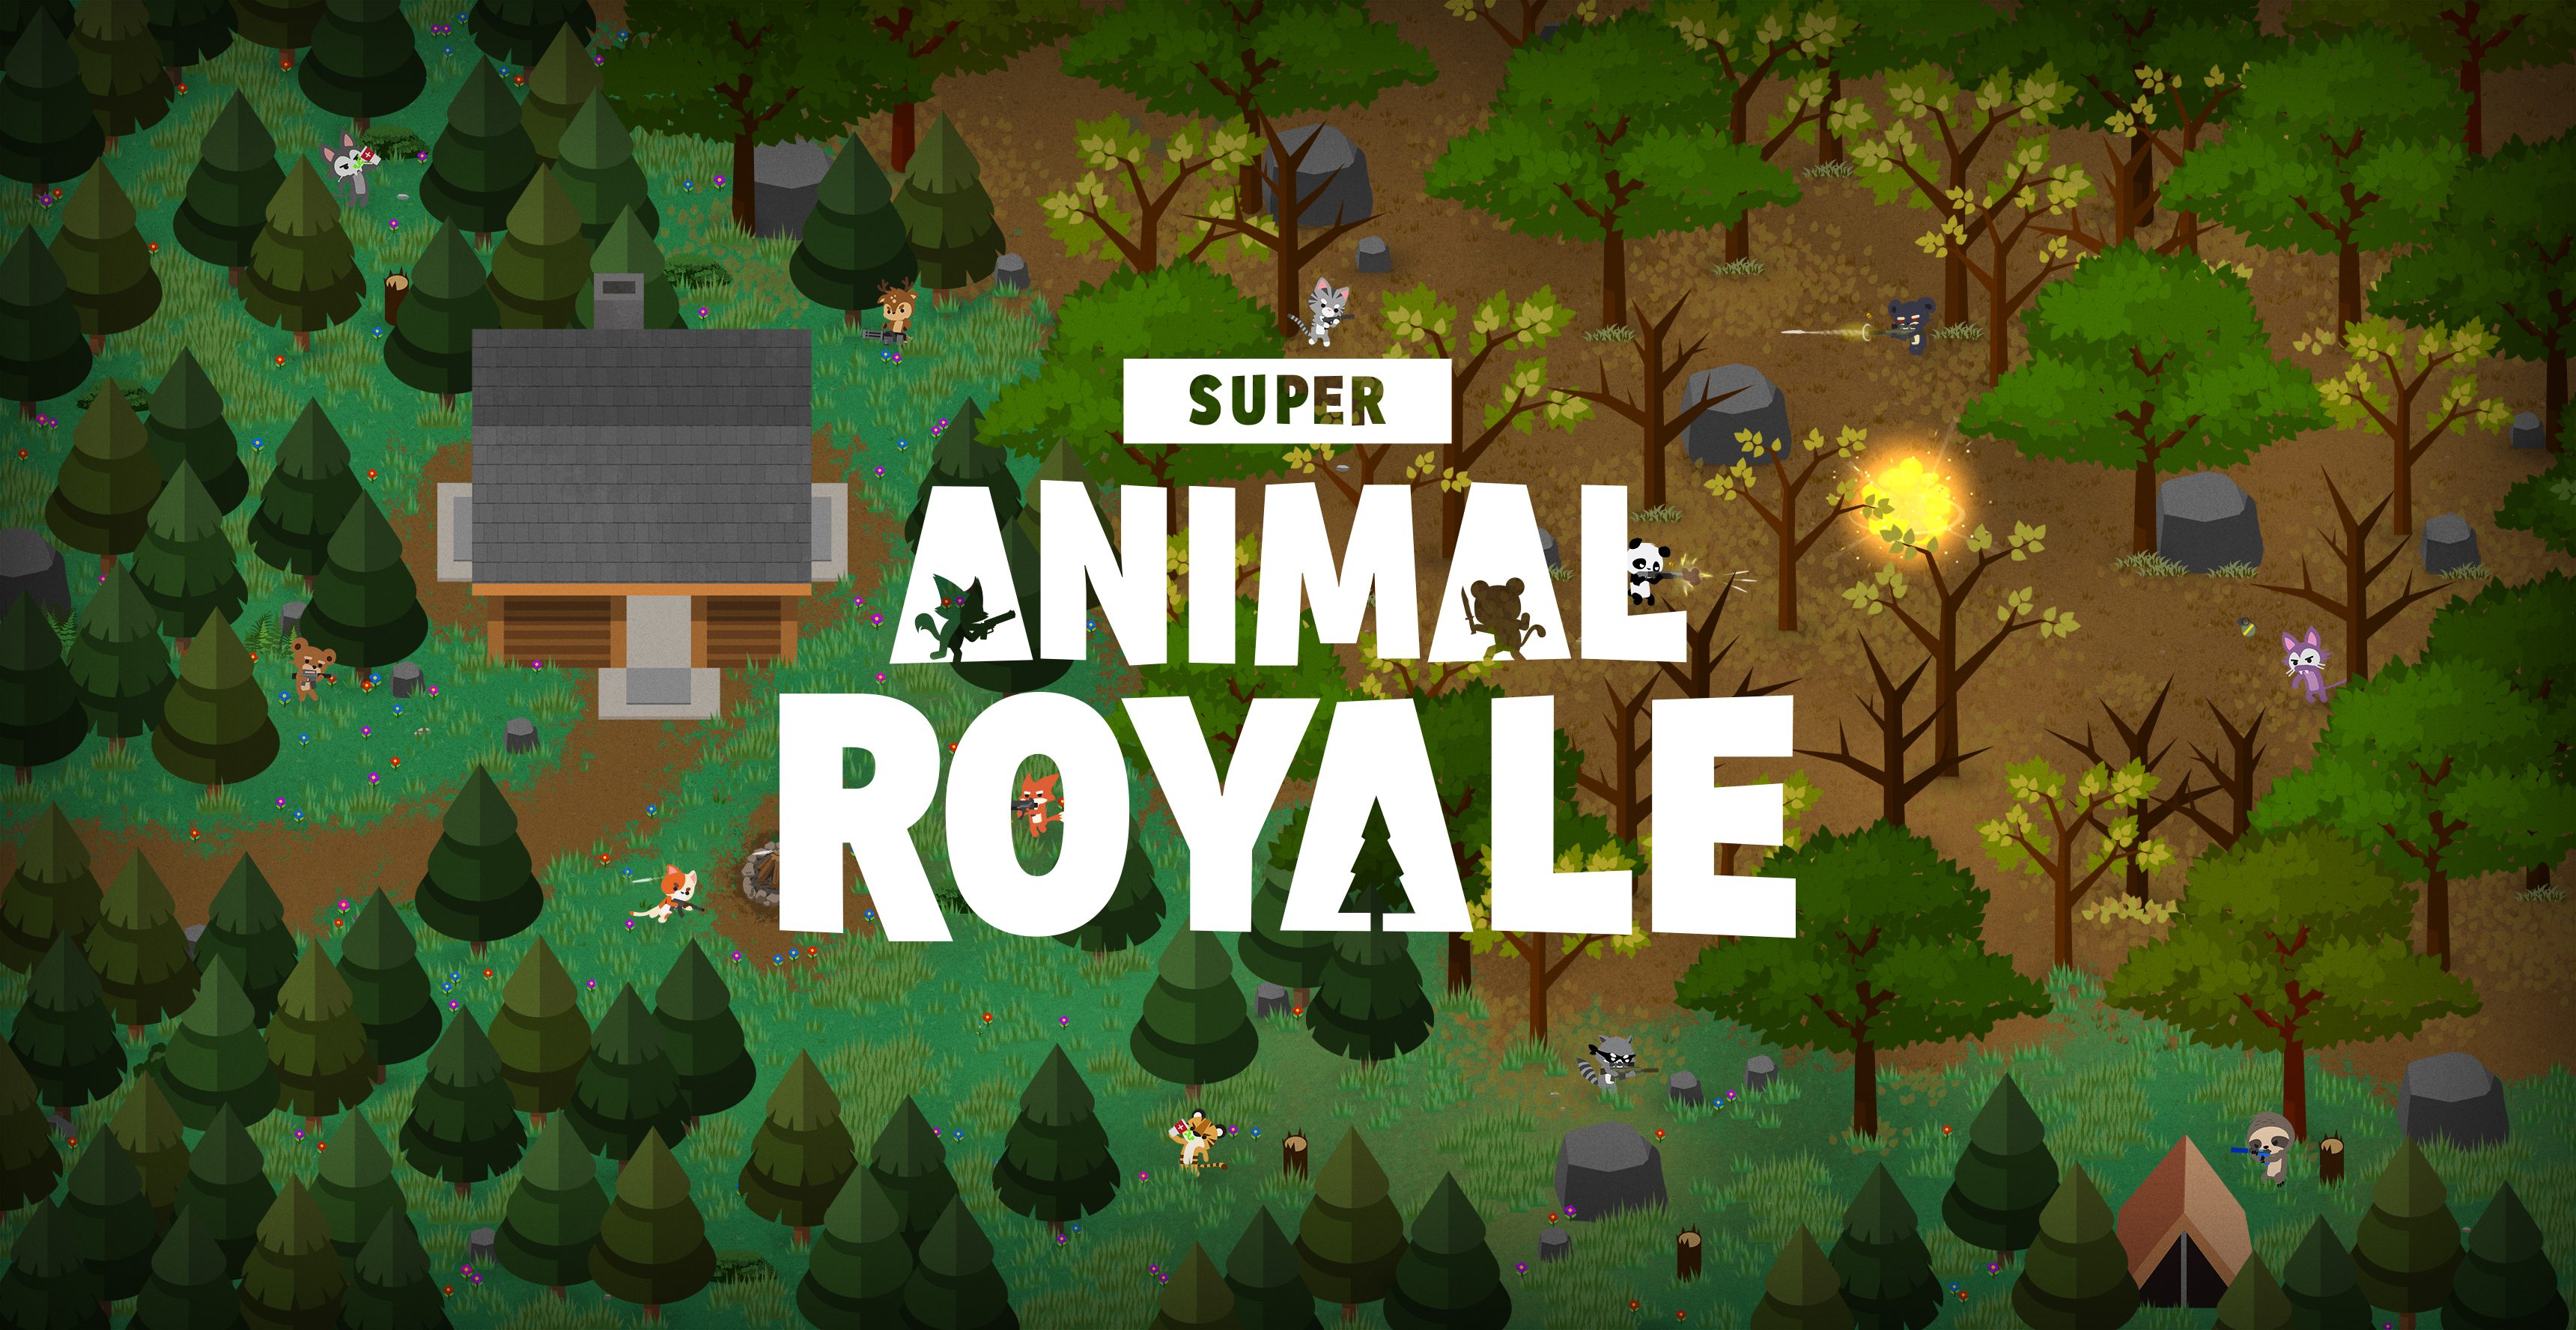 Super Animal Royale is about as wacky as it sounds